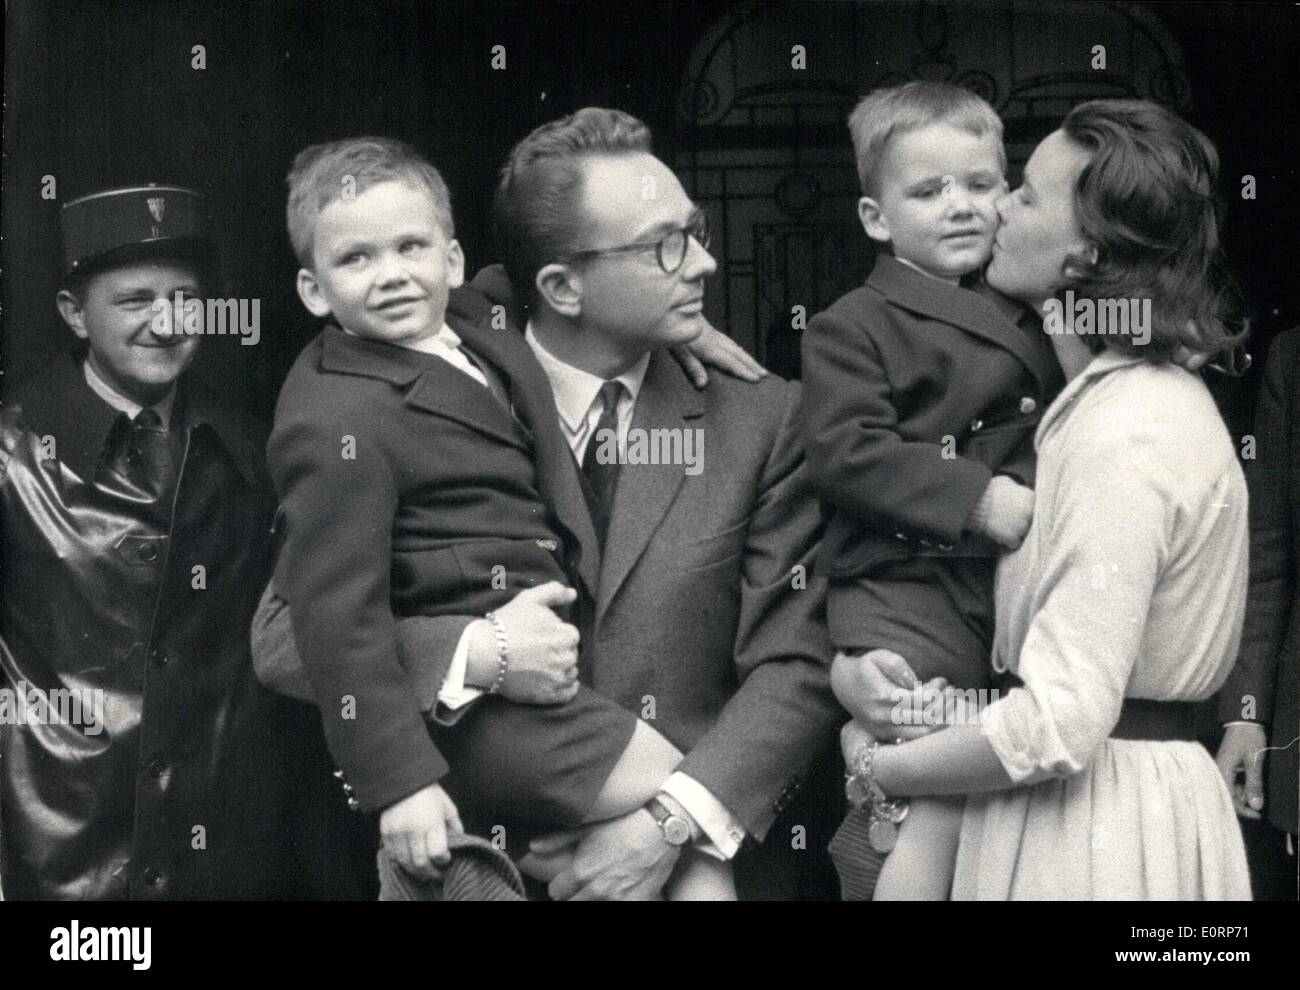 Apr. 04, 1960 - KIDNAPPED BOY FOUND OPS: FROM LEFT TO RIGHT: ROLAND PEUGEOT HOLDING IN HIS ARMS SEVEN-YEAR-OLD JEAN-PHILIPPE, THE ELDER BOY WHILE MME PEUGEOT MUGGS LITTLE ERIC. Stock Photo